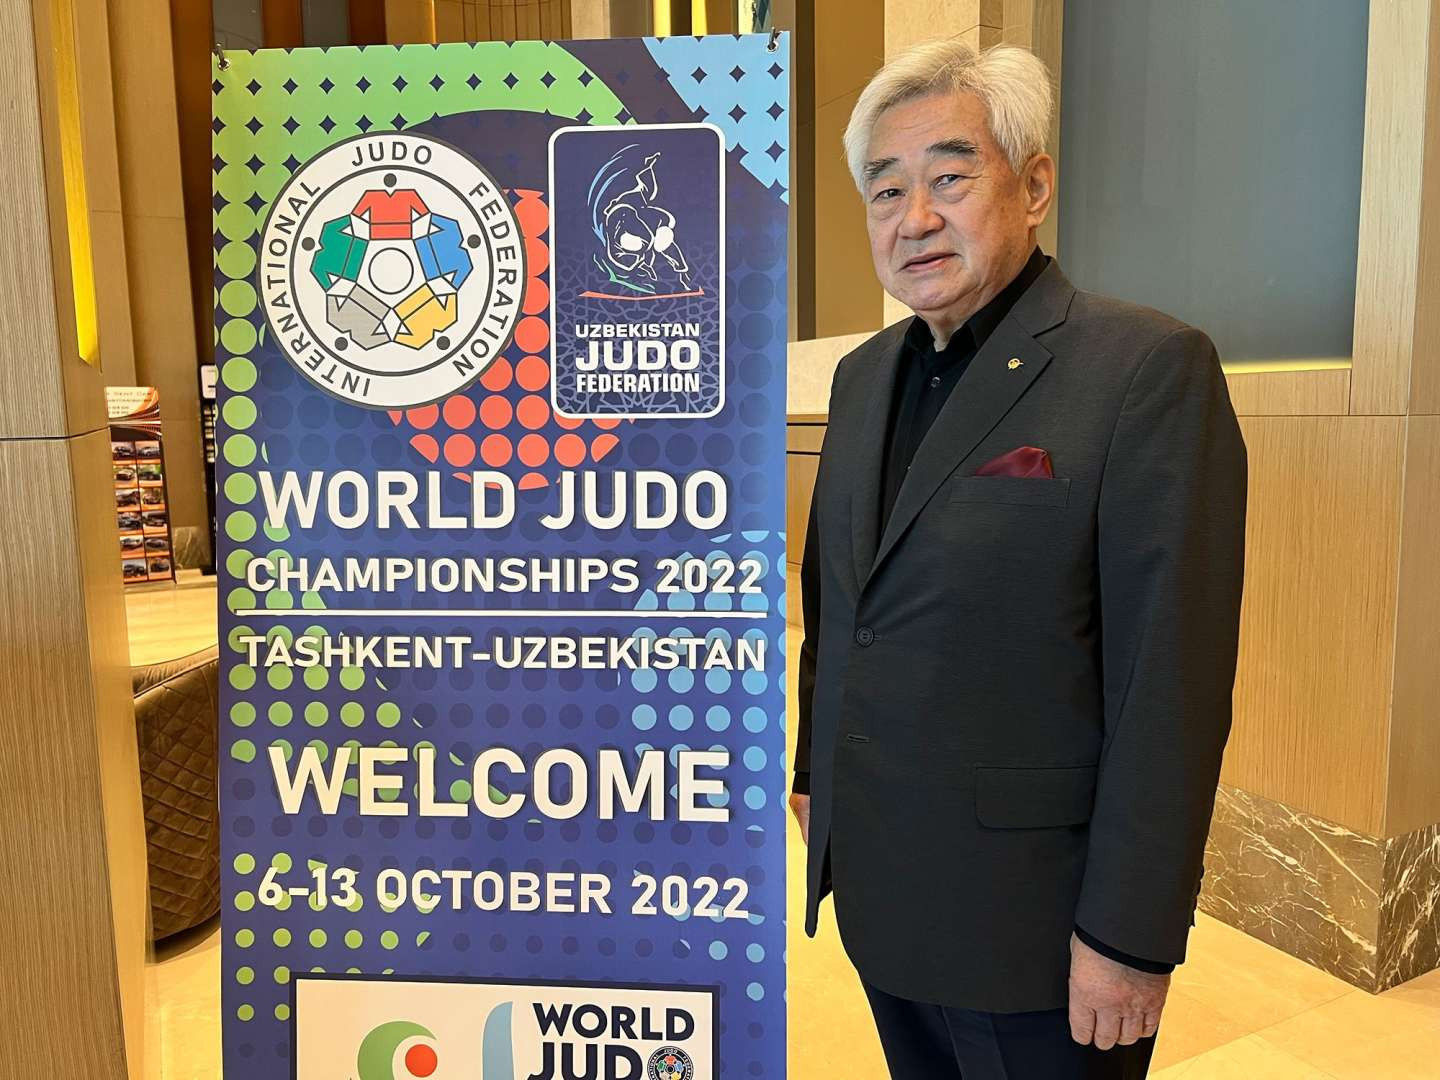 Choue hopes taekwondo and judo lead the way for others in assisting refugees